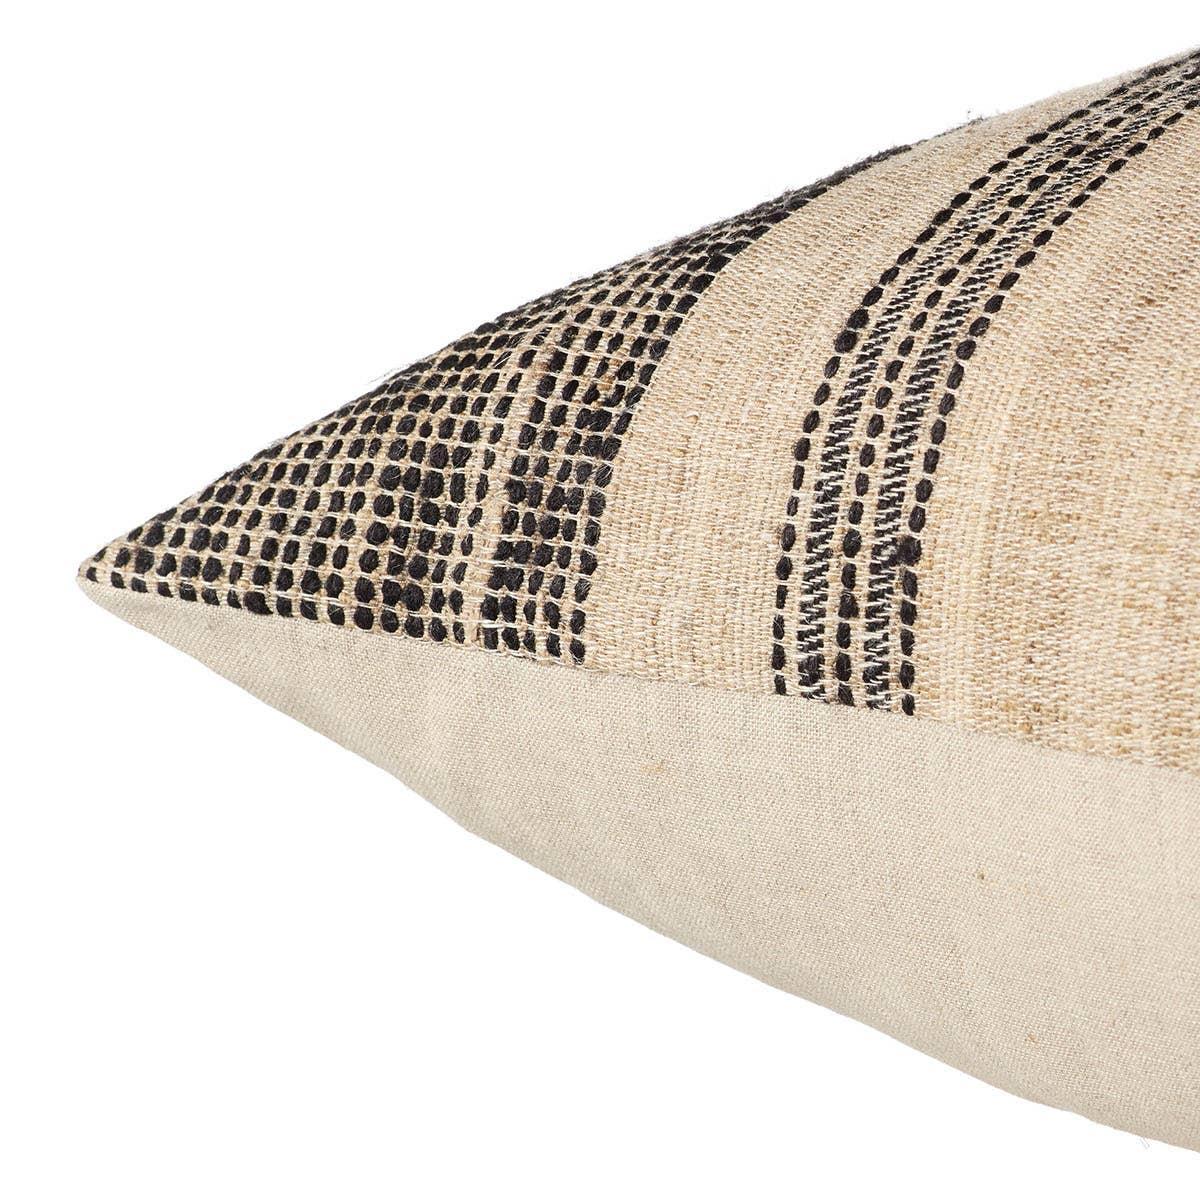 The handcrafted Assise pillow design draws its inspiration from classic linens. This casual stripe brings a sense of structure and order but balanced with an easy softness. The charcoal and off-white color palette provides neutrality to any space.Indoor Pillow Amethyst Home provides interior design, new home construction design consulting, vintage area rugs, and lighting in the Laguna Beach metro area.